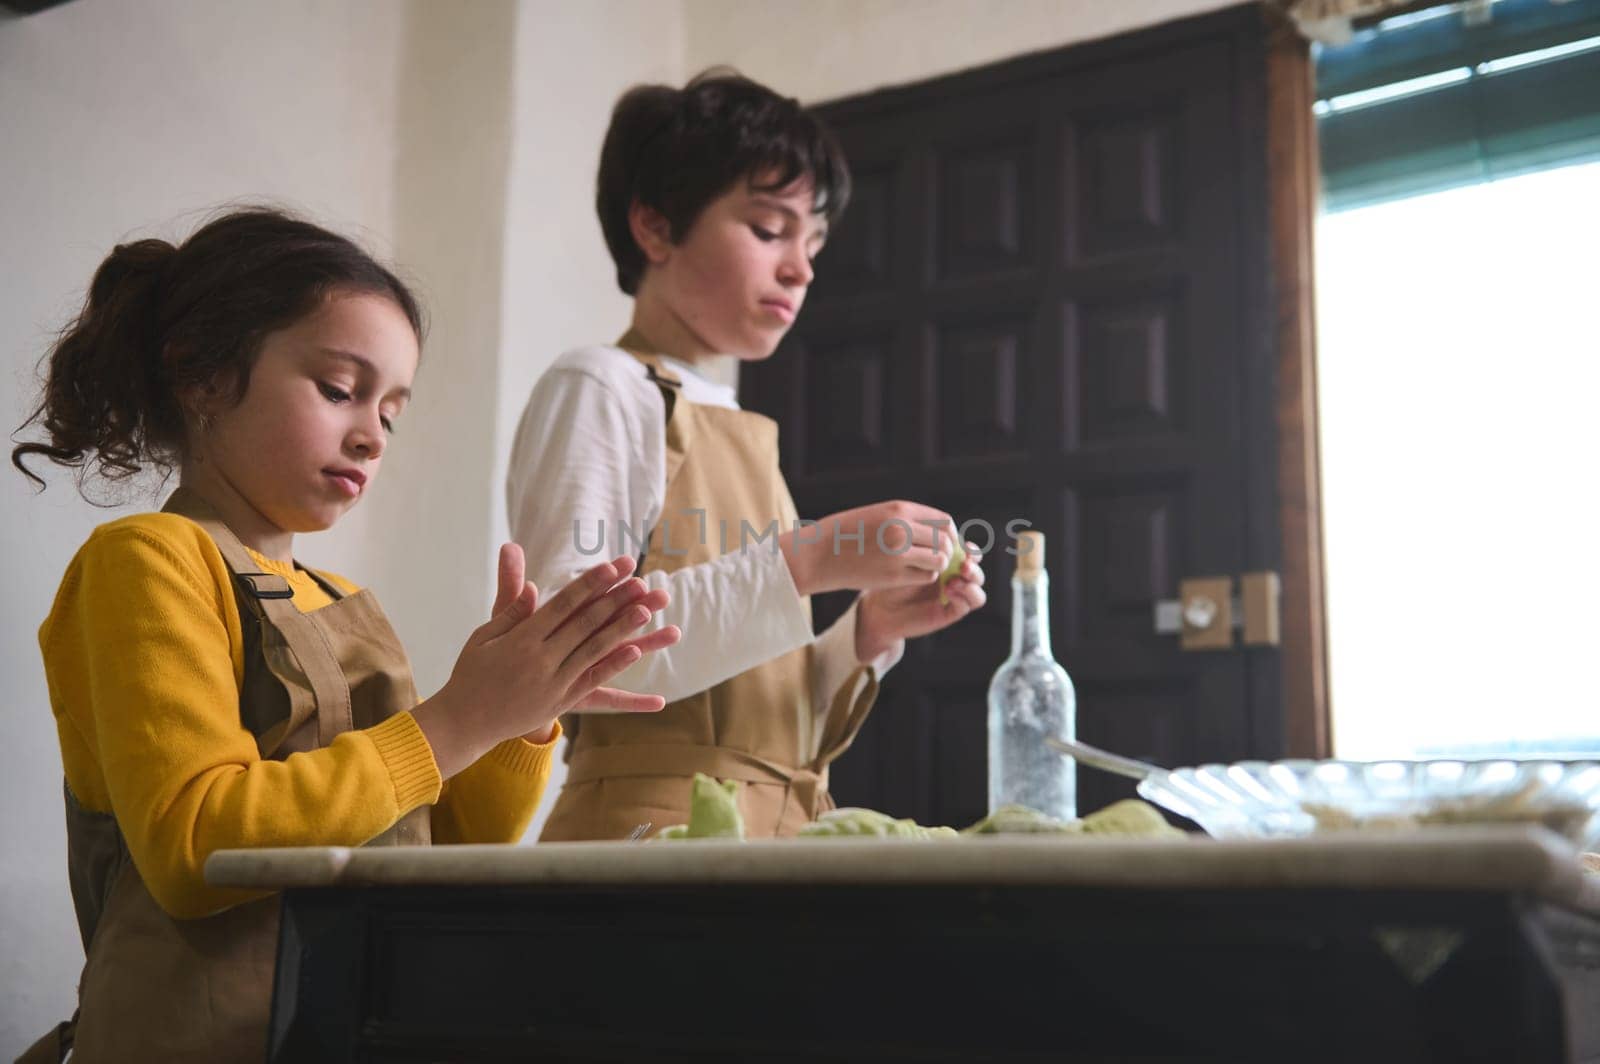 Kids modeling dumplings, standing at floured table at home kitchen interior. Caucasian boy and girl preparing a family dinner together, sculpting green ravioli according to Italian traditional recipe